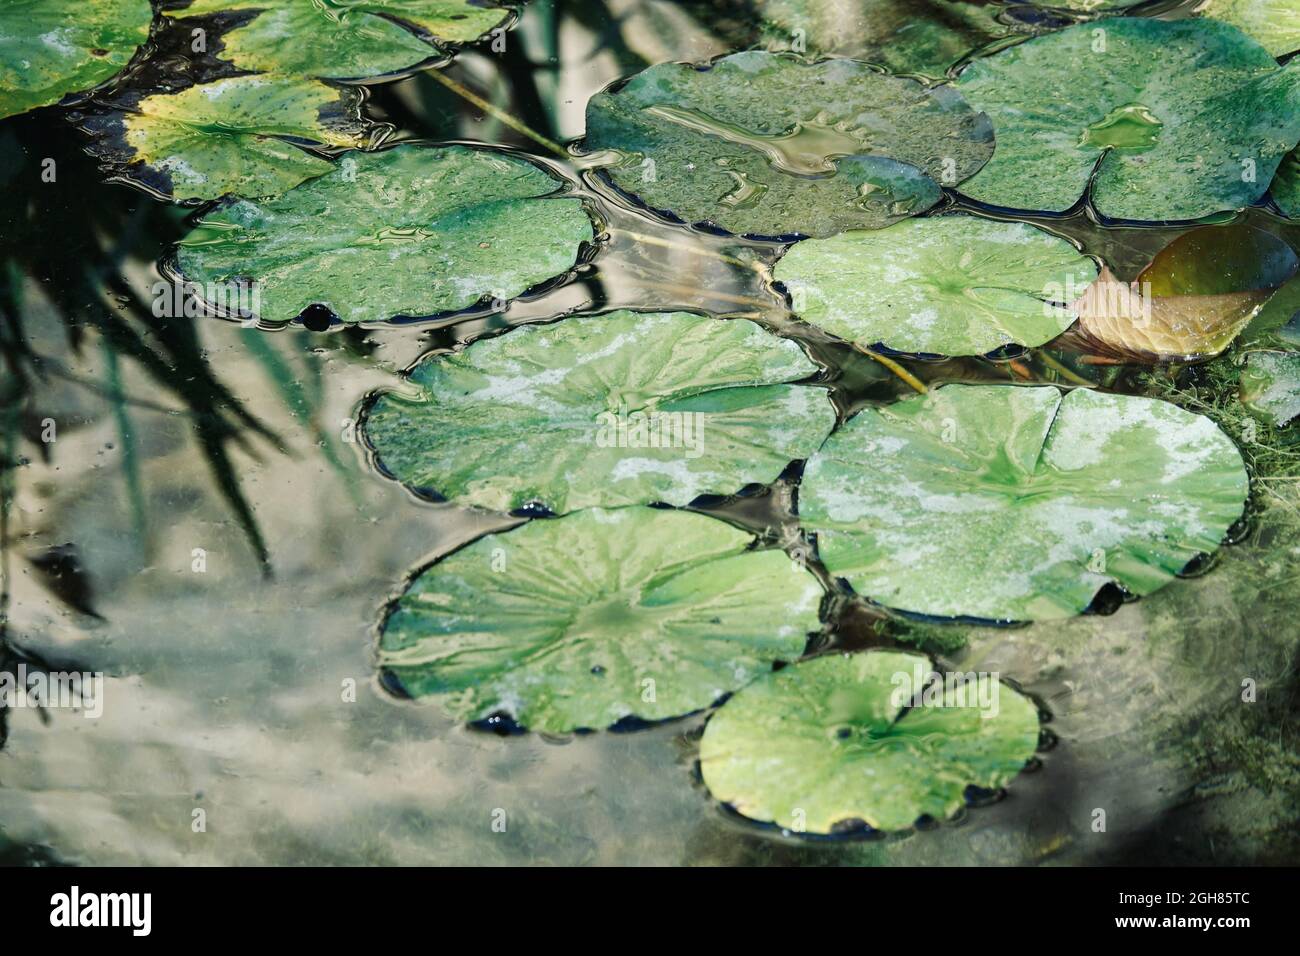 Background with green leaves of water lilies in a pond Stock Photo